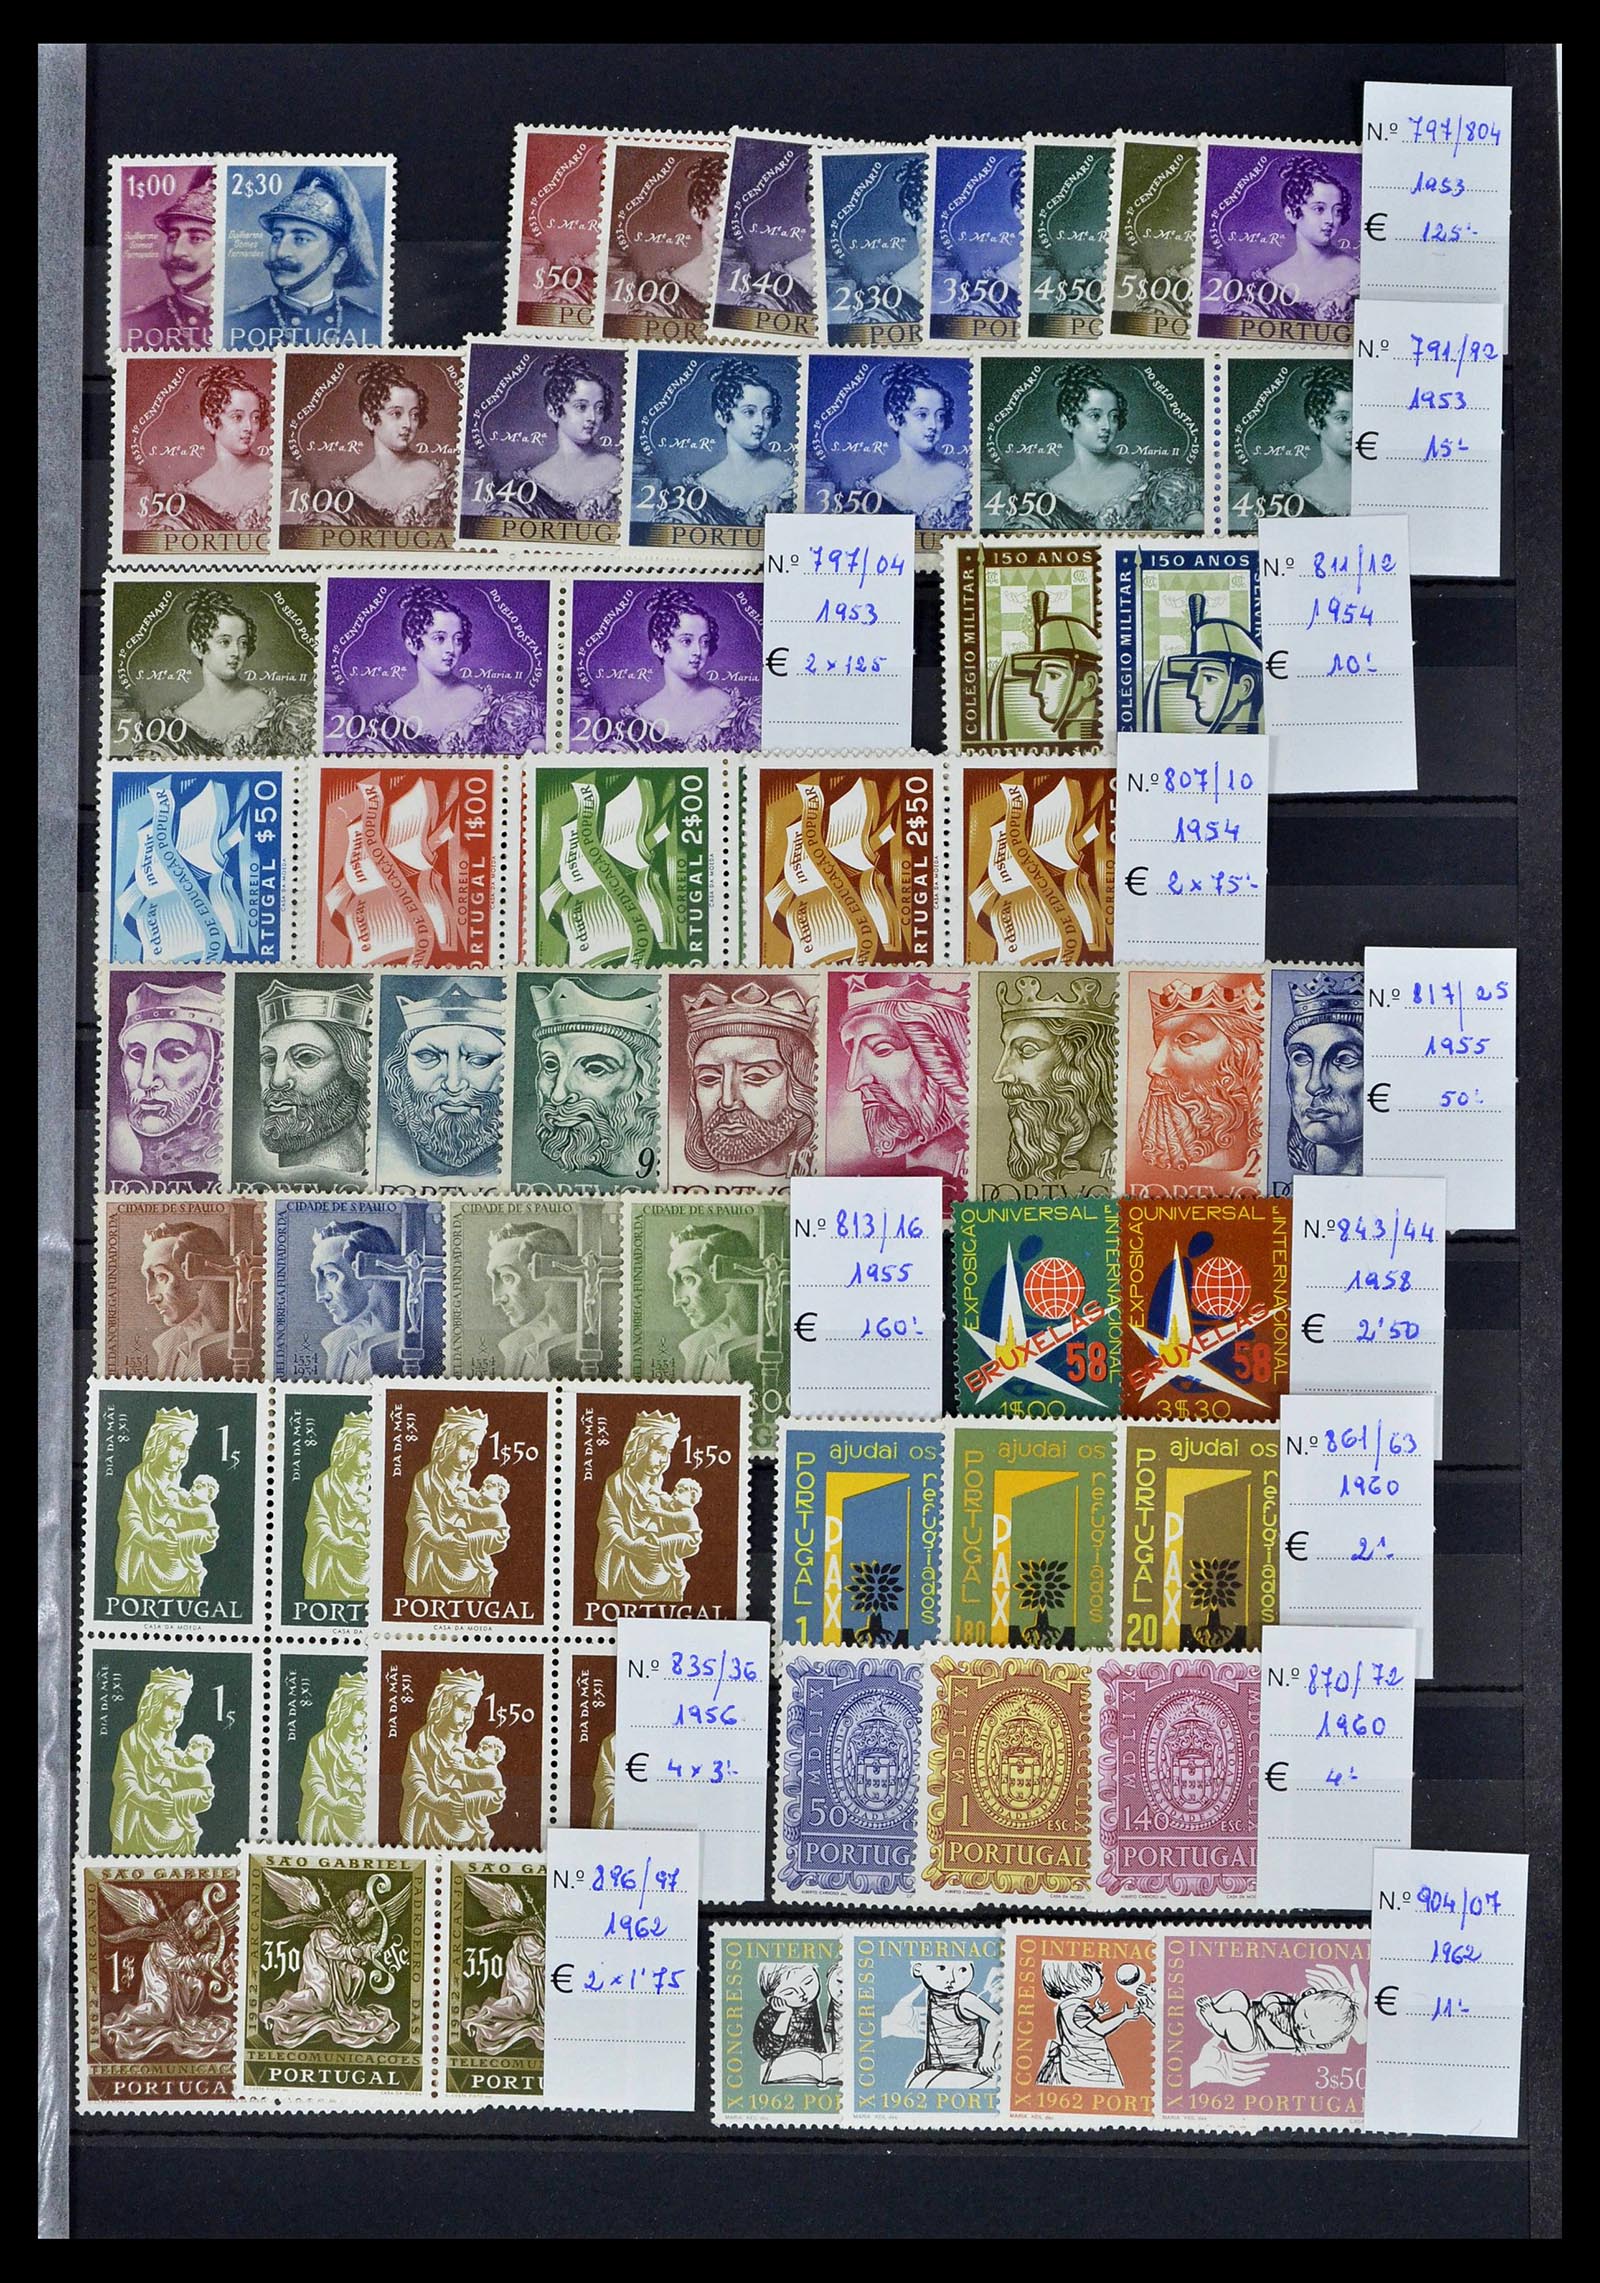 39236 0010 - Stamp collection 39236 European countries 40s-60s.